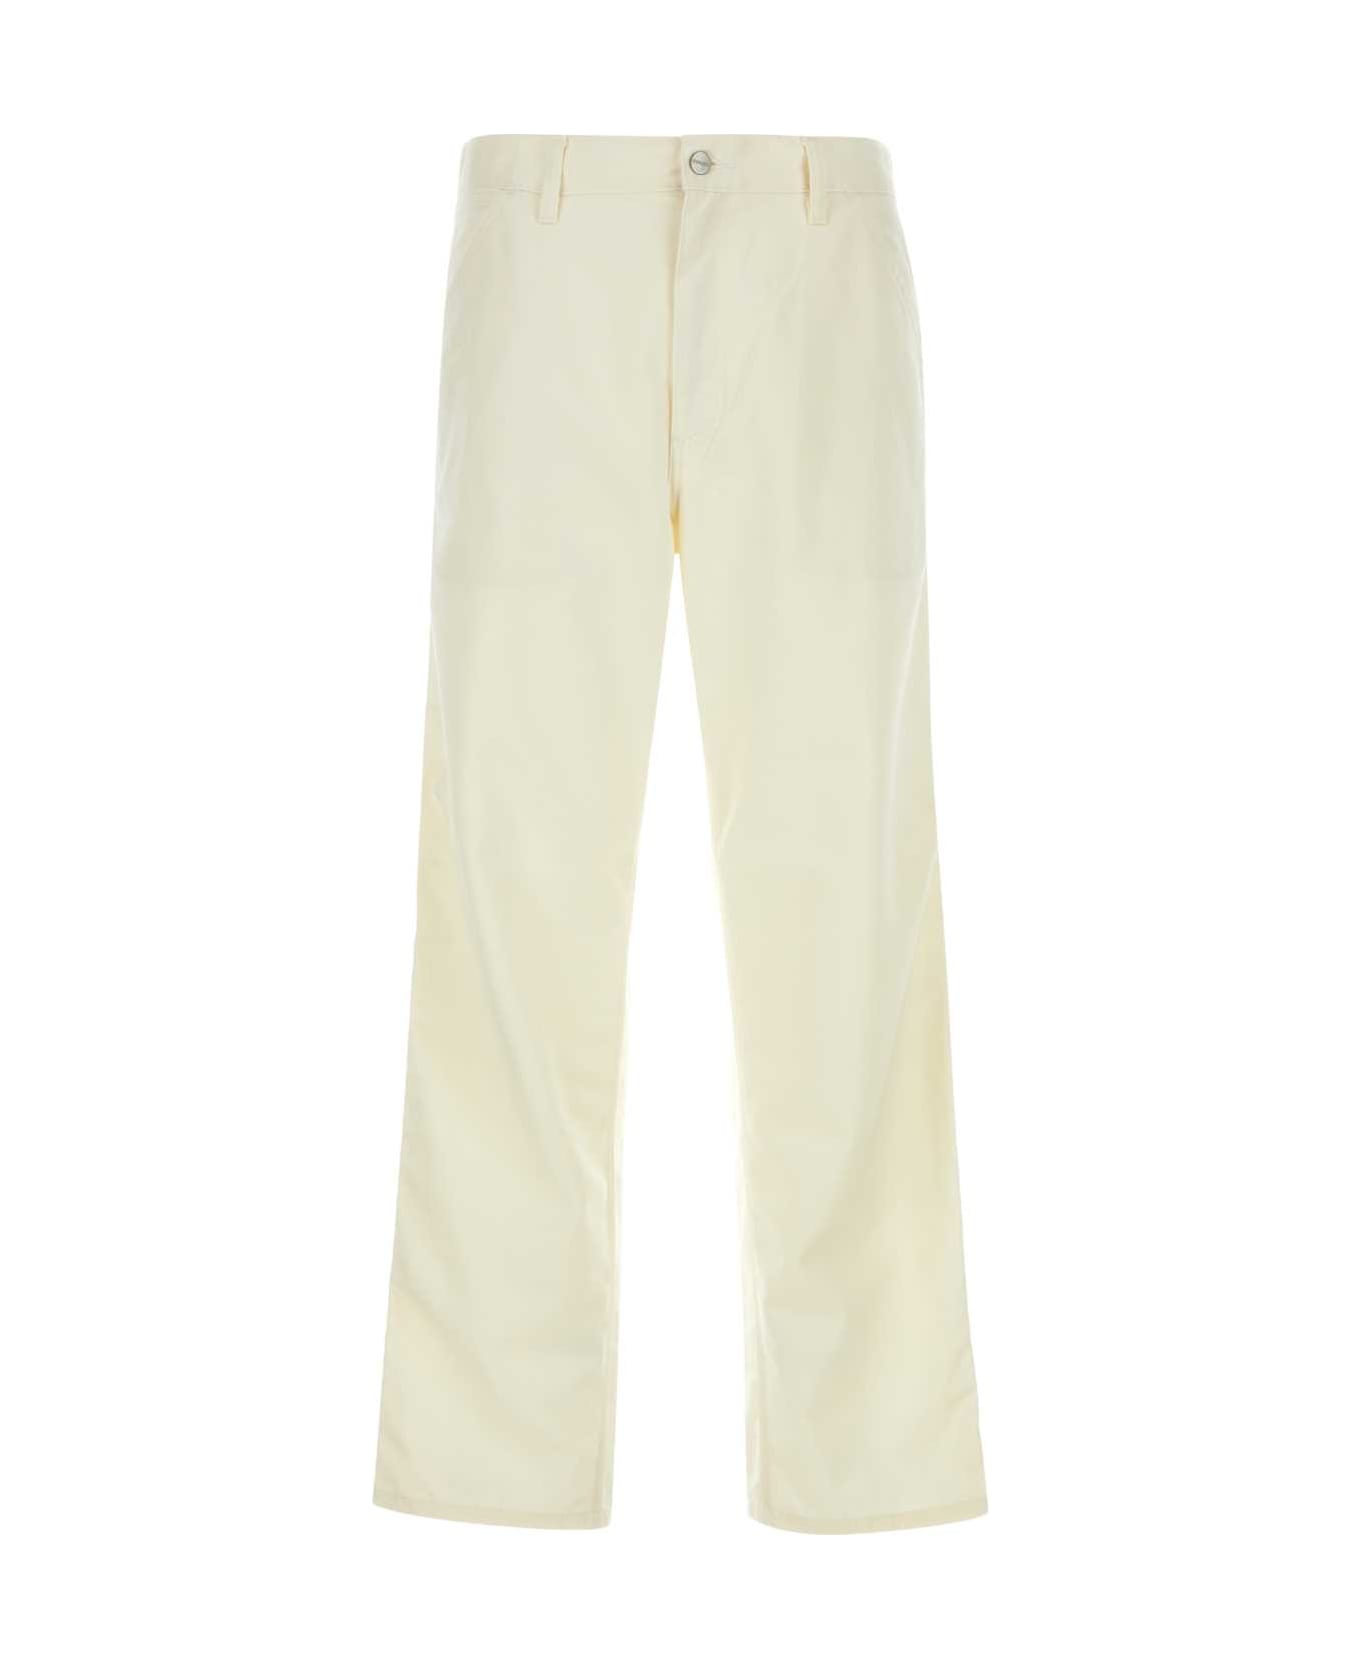 Carhartt Ivory Polyester Blend Simple Pant - WAX